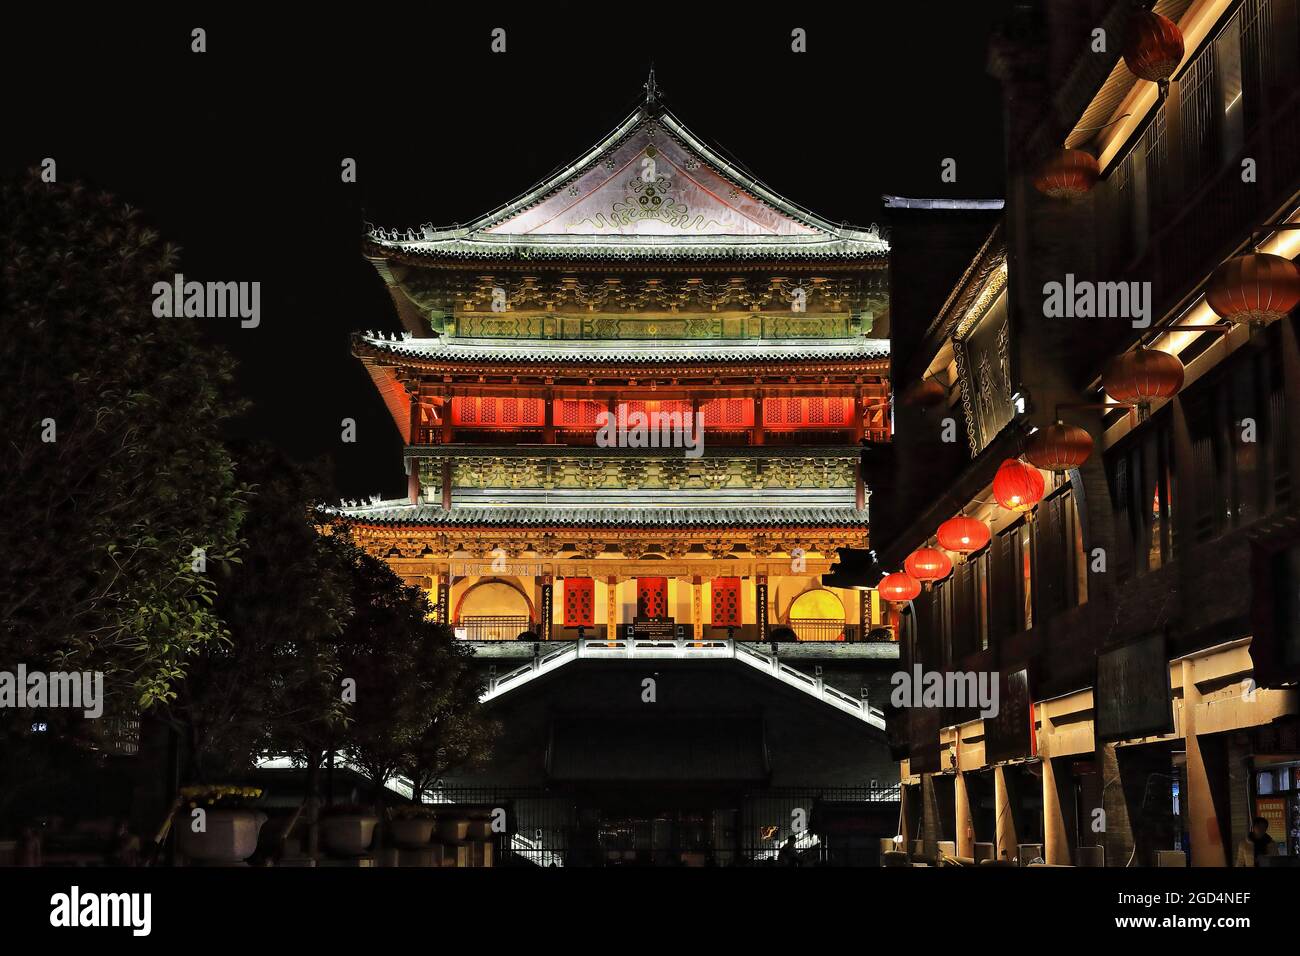 Night view-brightly illuminated east facade-Gulou or Drum Tower. Xi'an-Shaanxi-China-1536 Stock Photo